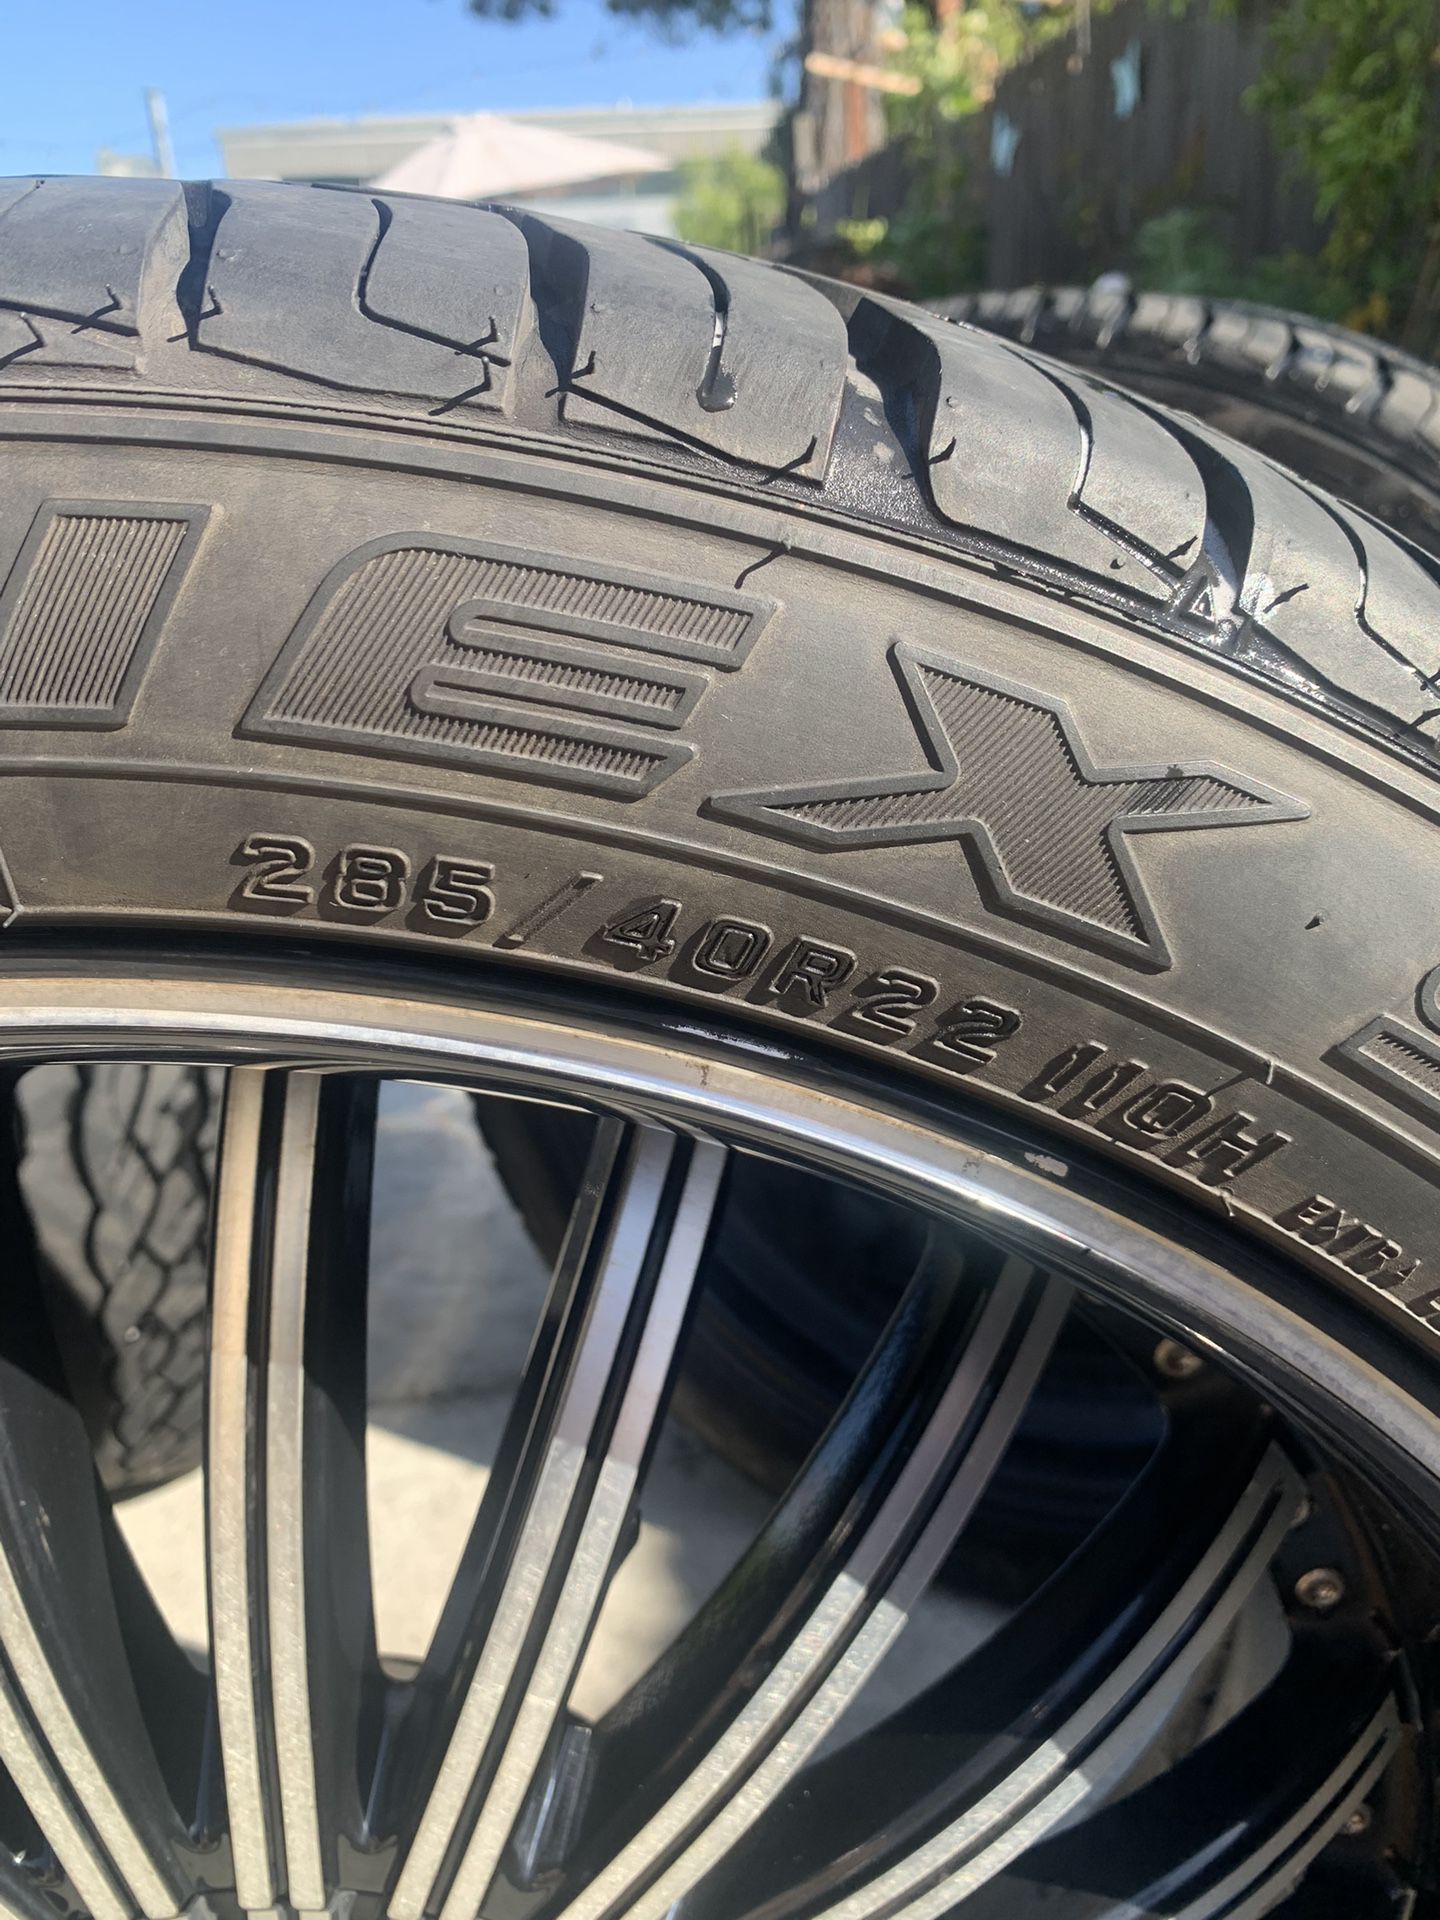 Tires With Rim